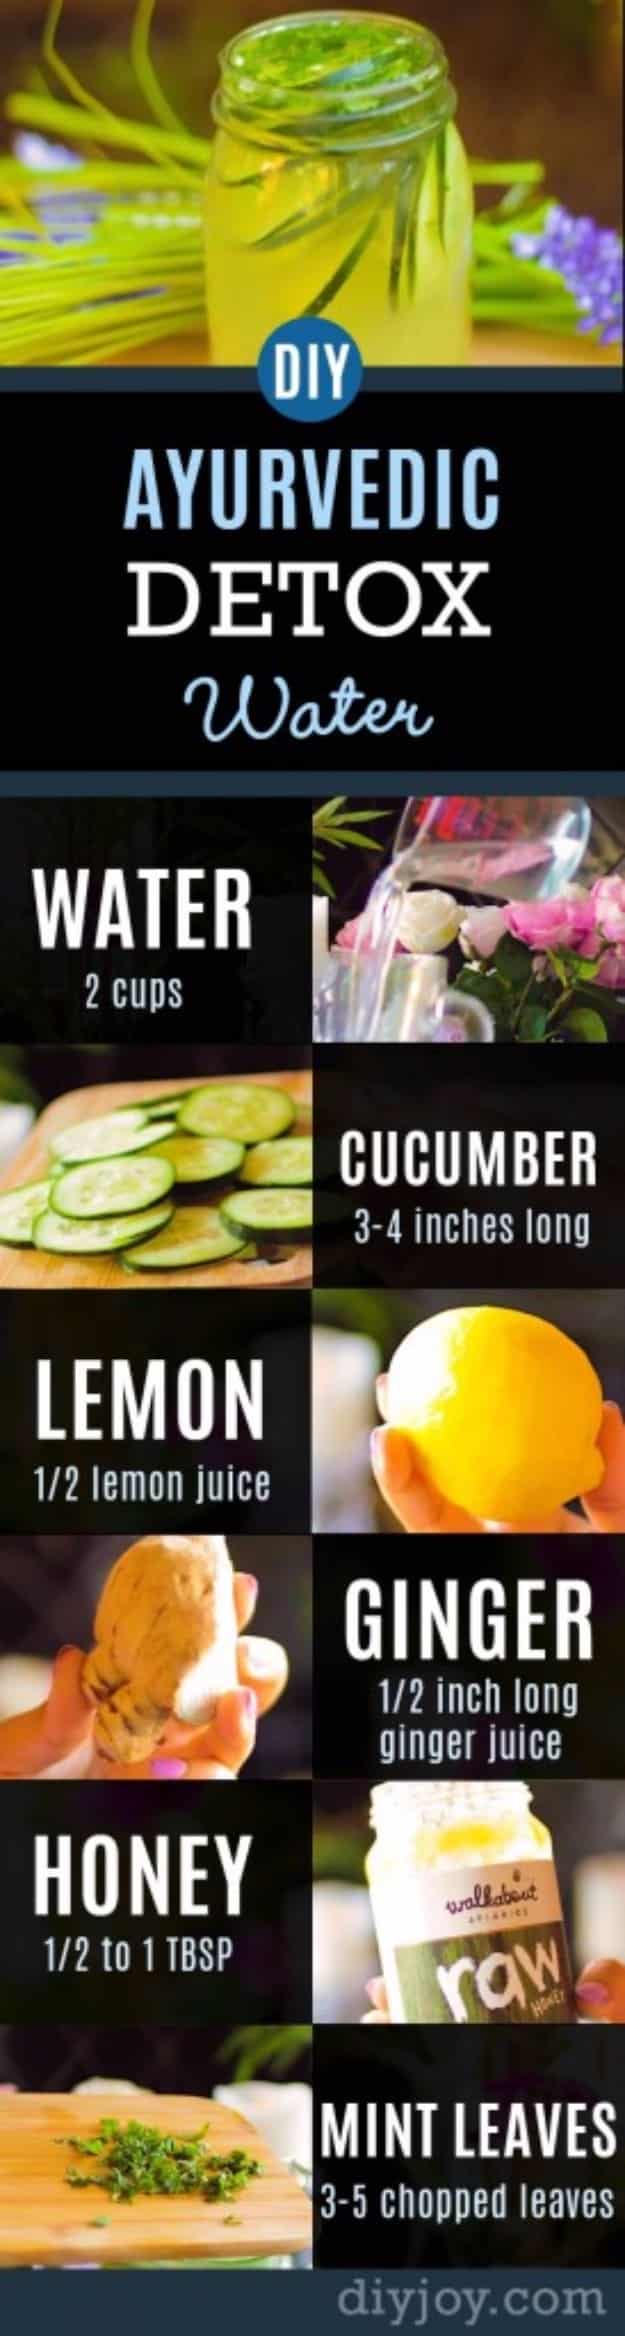 DIY Detox Recipes, Ideas and Tips - Ayurvedic Detox Water For Weight Loss - How to Detox Your Body, Brain and Skin for Health and Weight Loss. Detox Drinks, Waters, Teas, Wraps, Soup, Masks and Skincare Products You Can Make At Home 